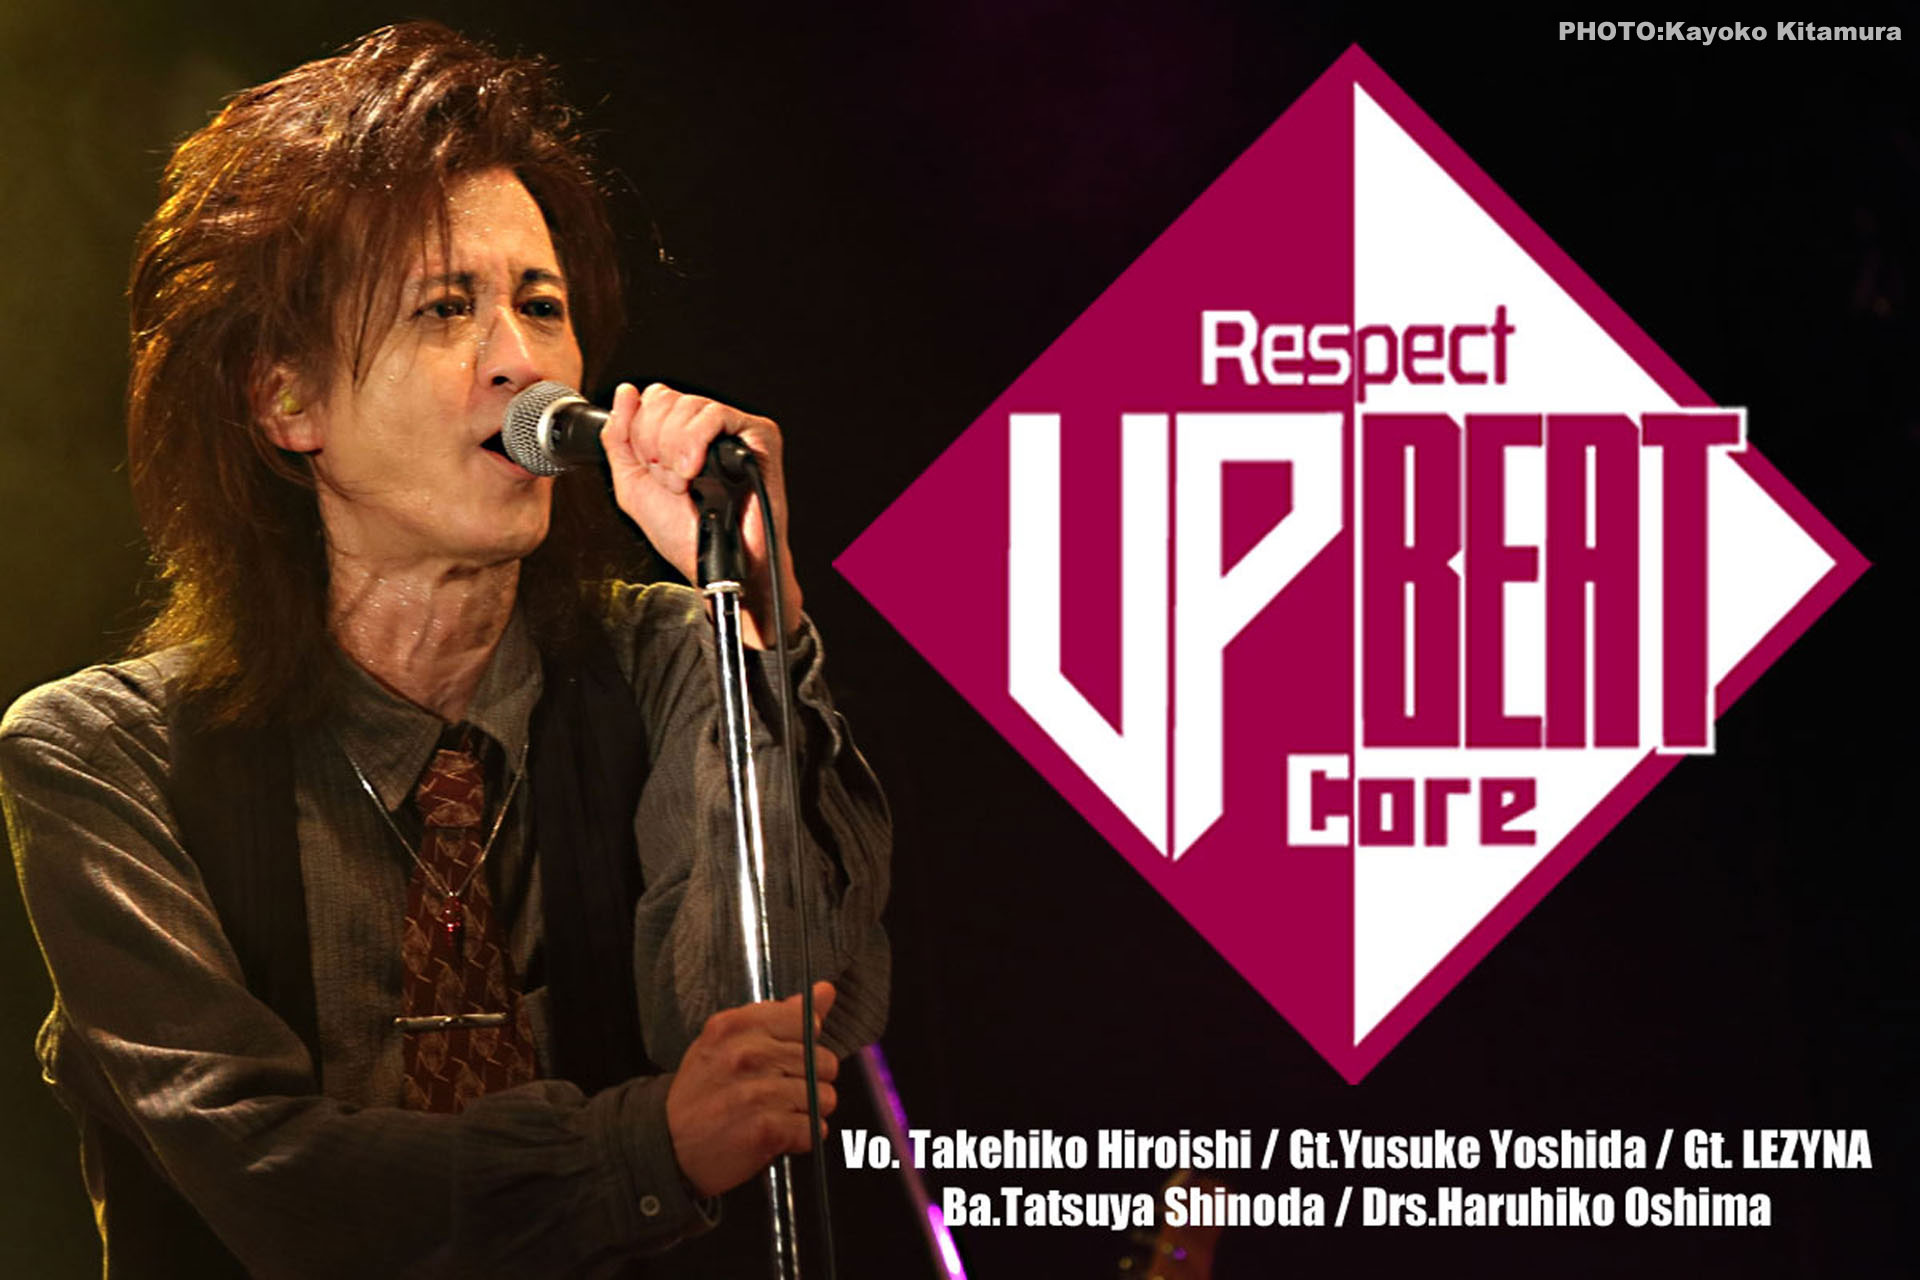 up-beat tribute band Respect up-beat DVD広石武彦